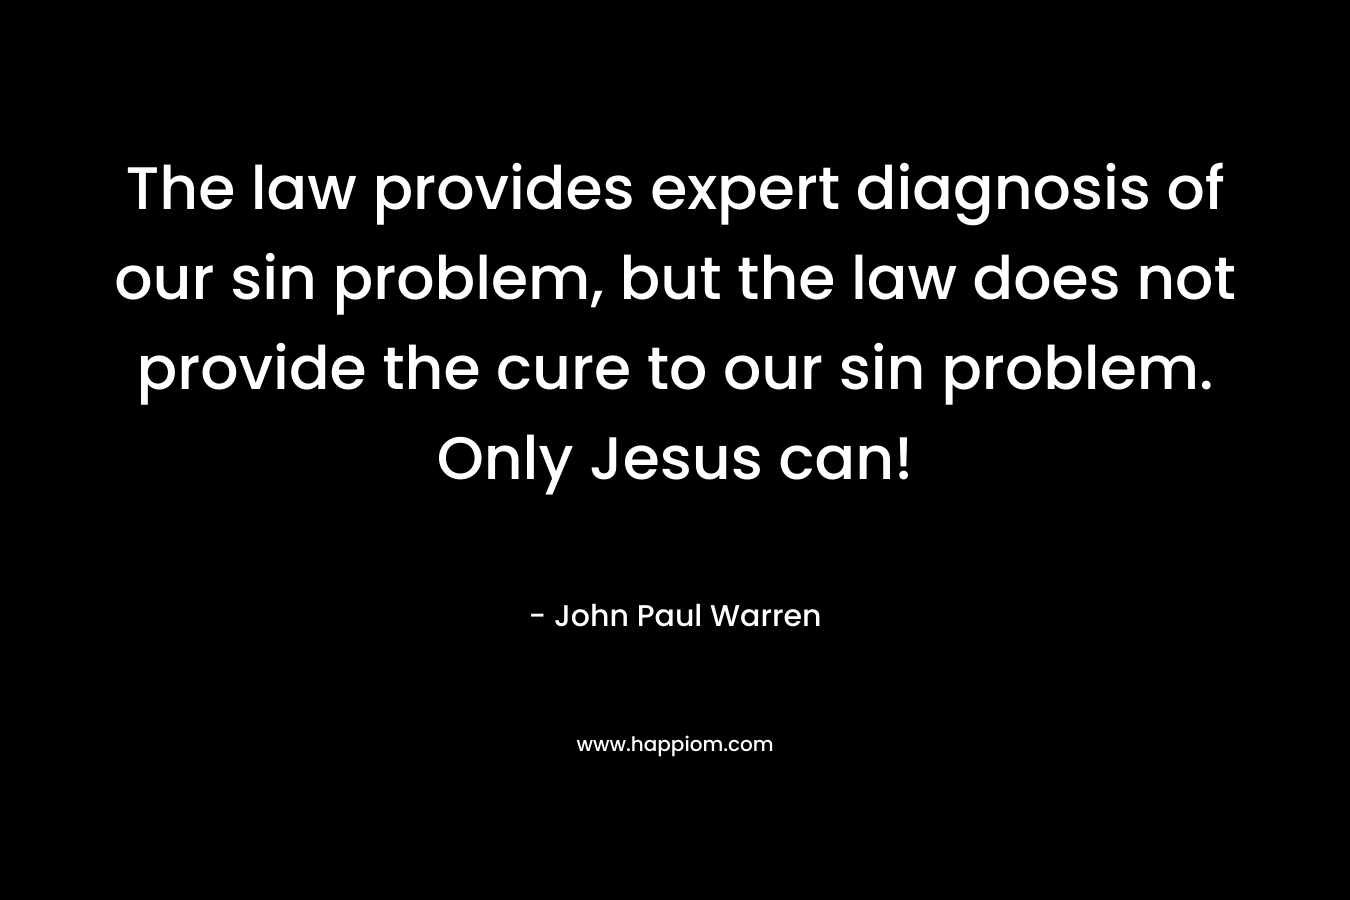 The law provides expert diagnosis of our sin problem, but the law does not provide the cure to our sin problem. Only Jesus can!